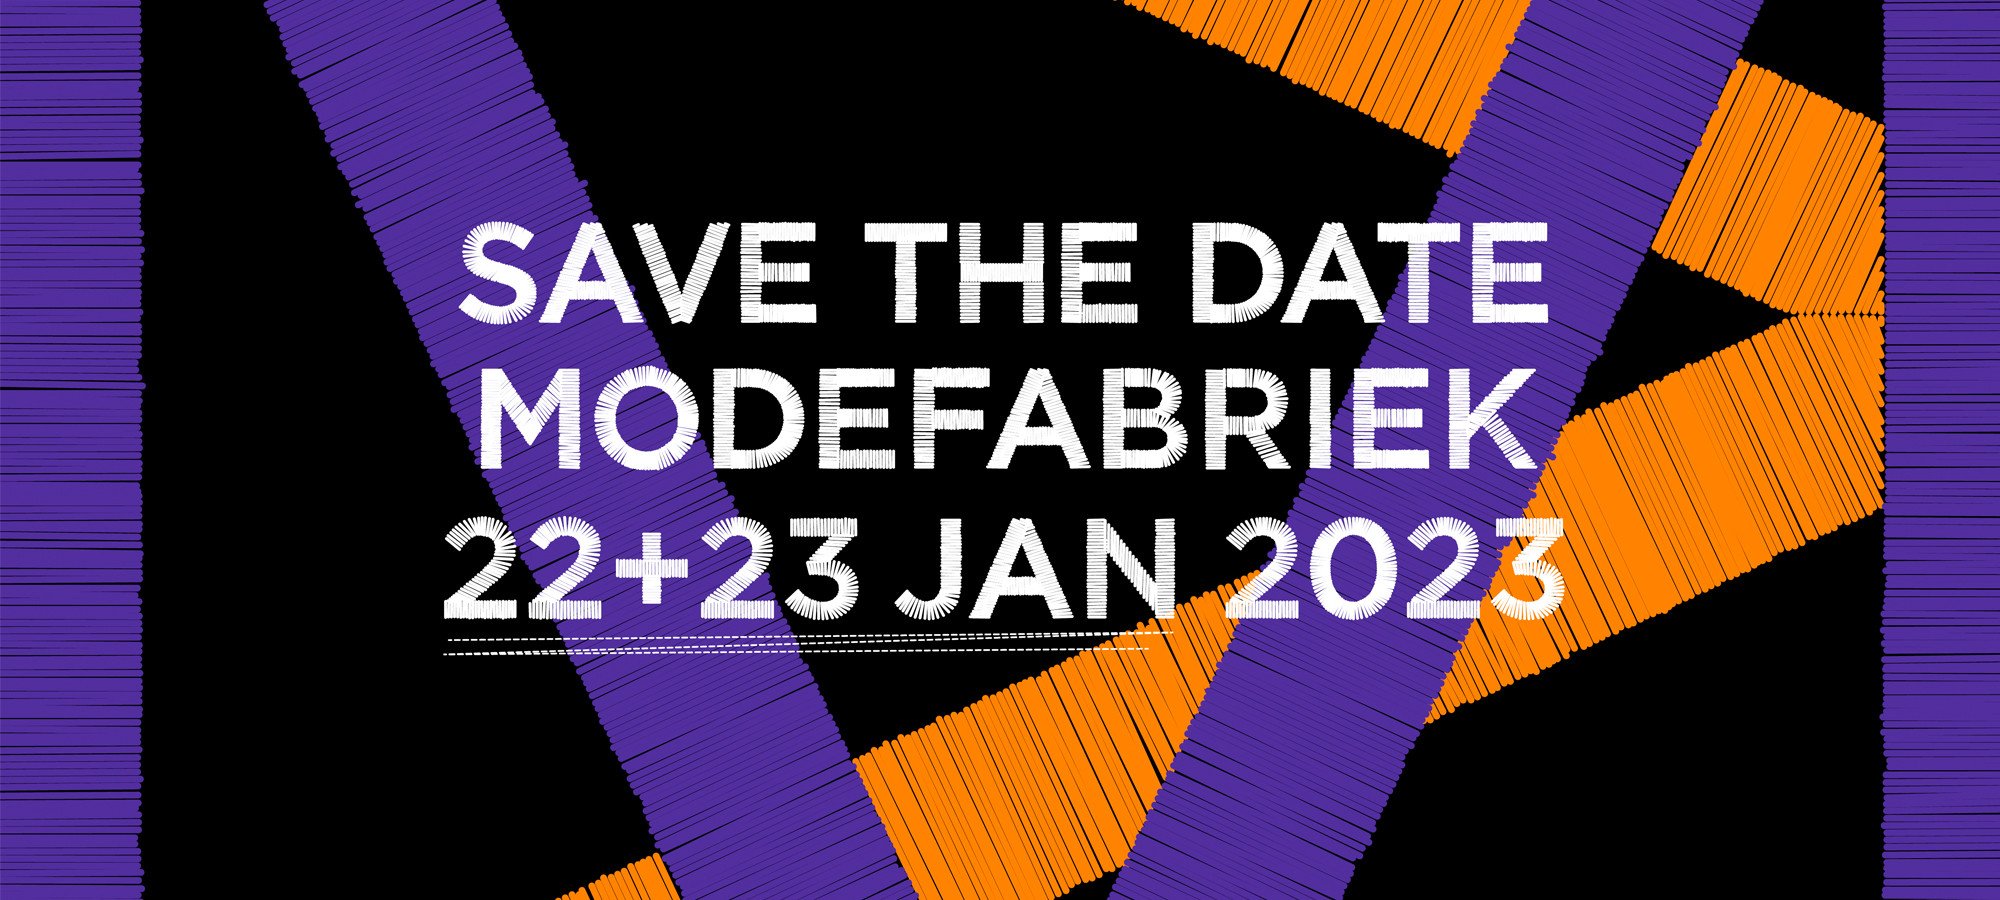 SAVE THE DATE FOR MODEFABRIEK!